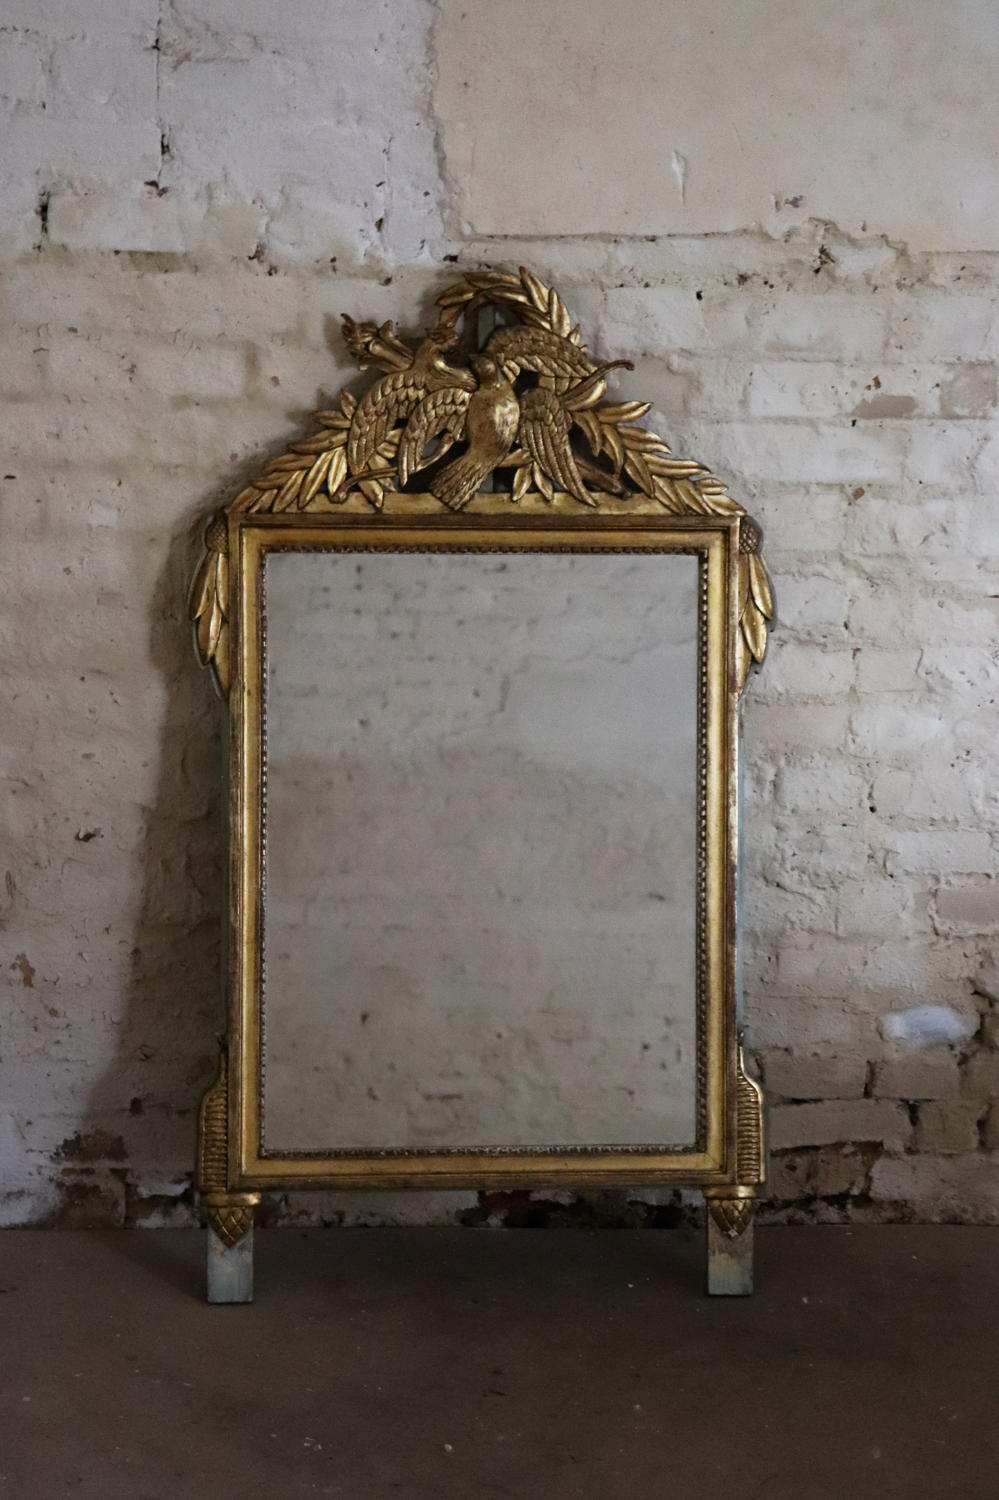 19th century gilt French mirror with birds